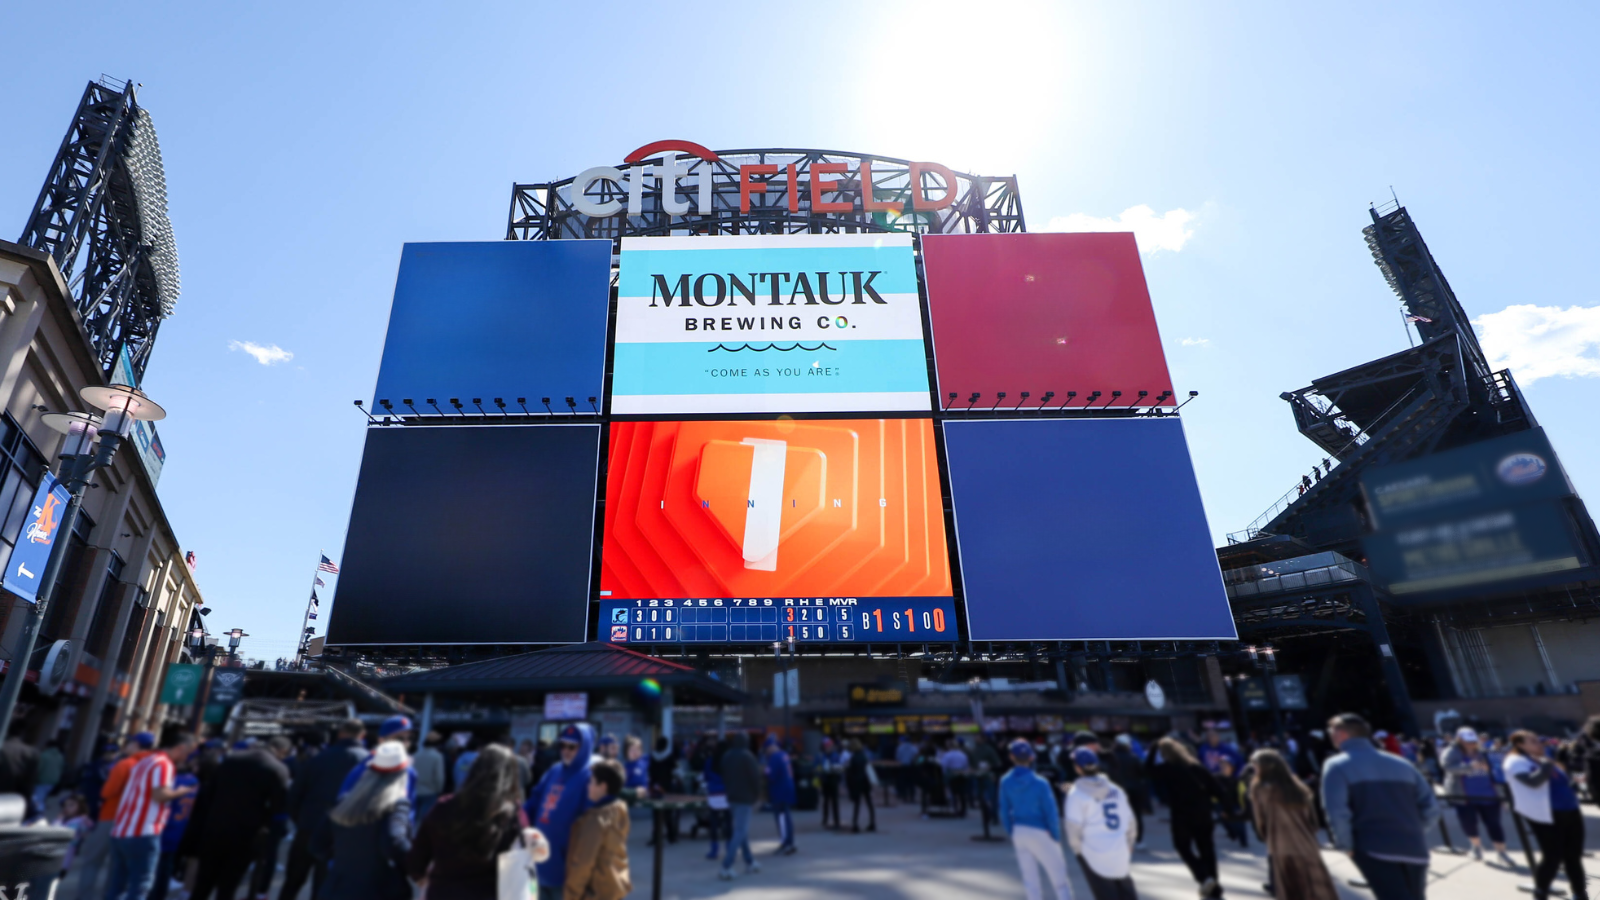 Montauk Brings Local Flavor to The K Korner at Citi Field with Fan-Favorite Montauk Brewing Signature Craft Beers.